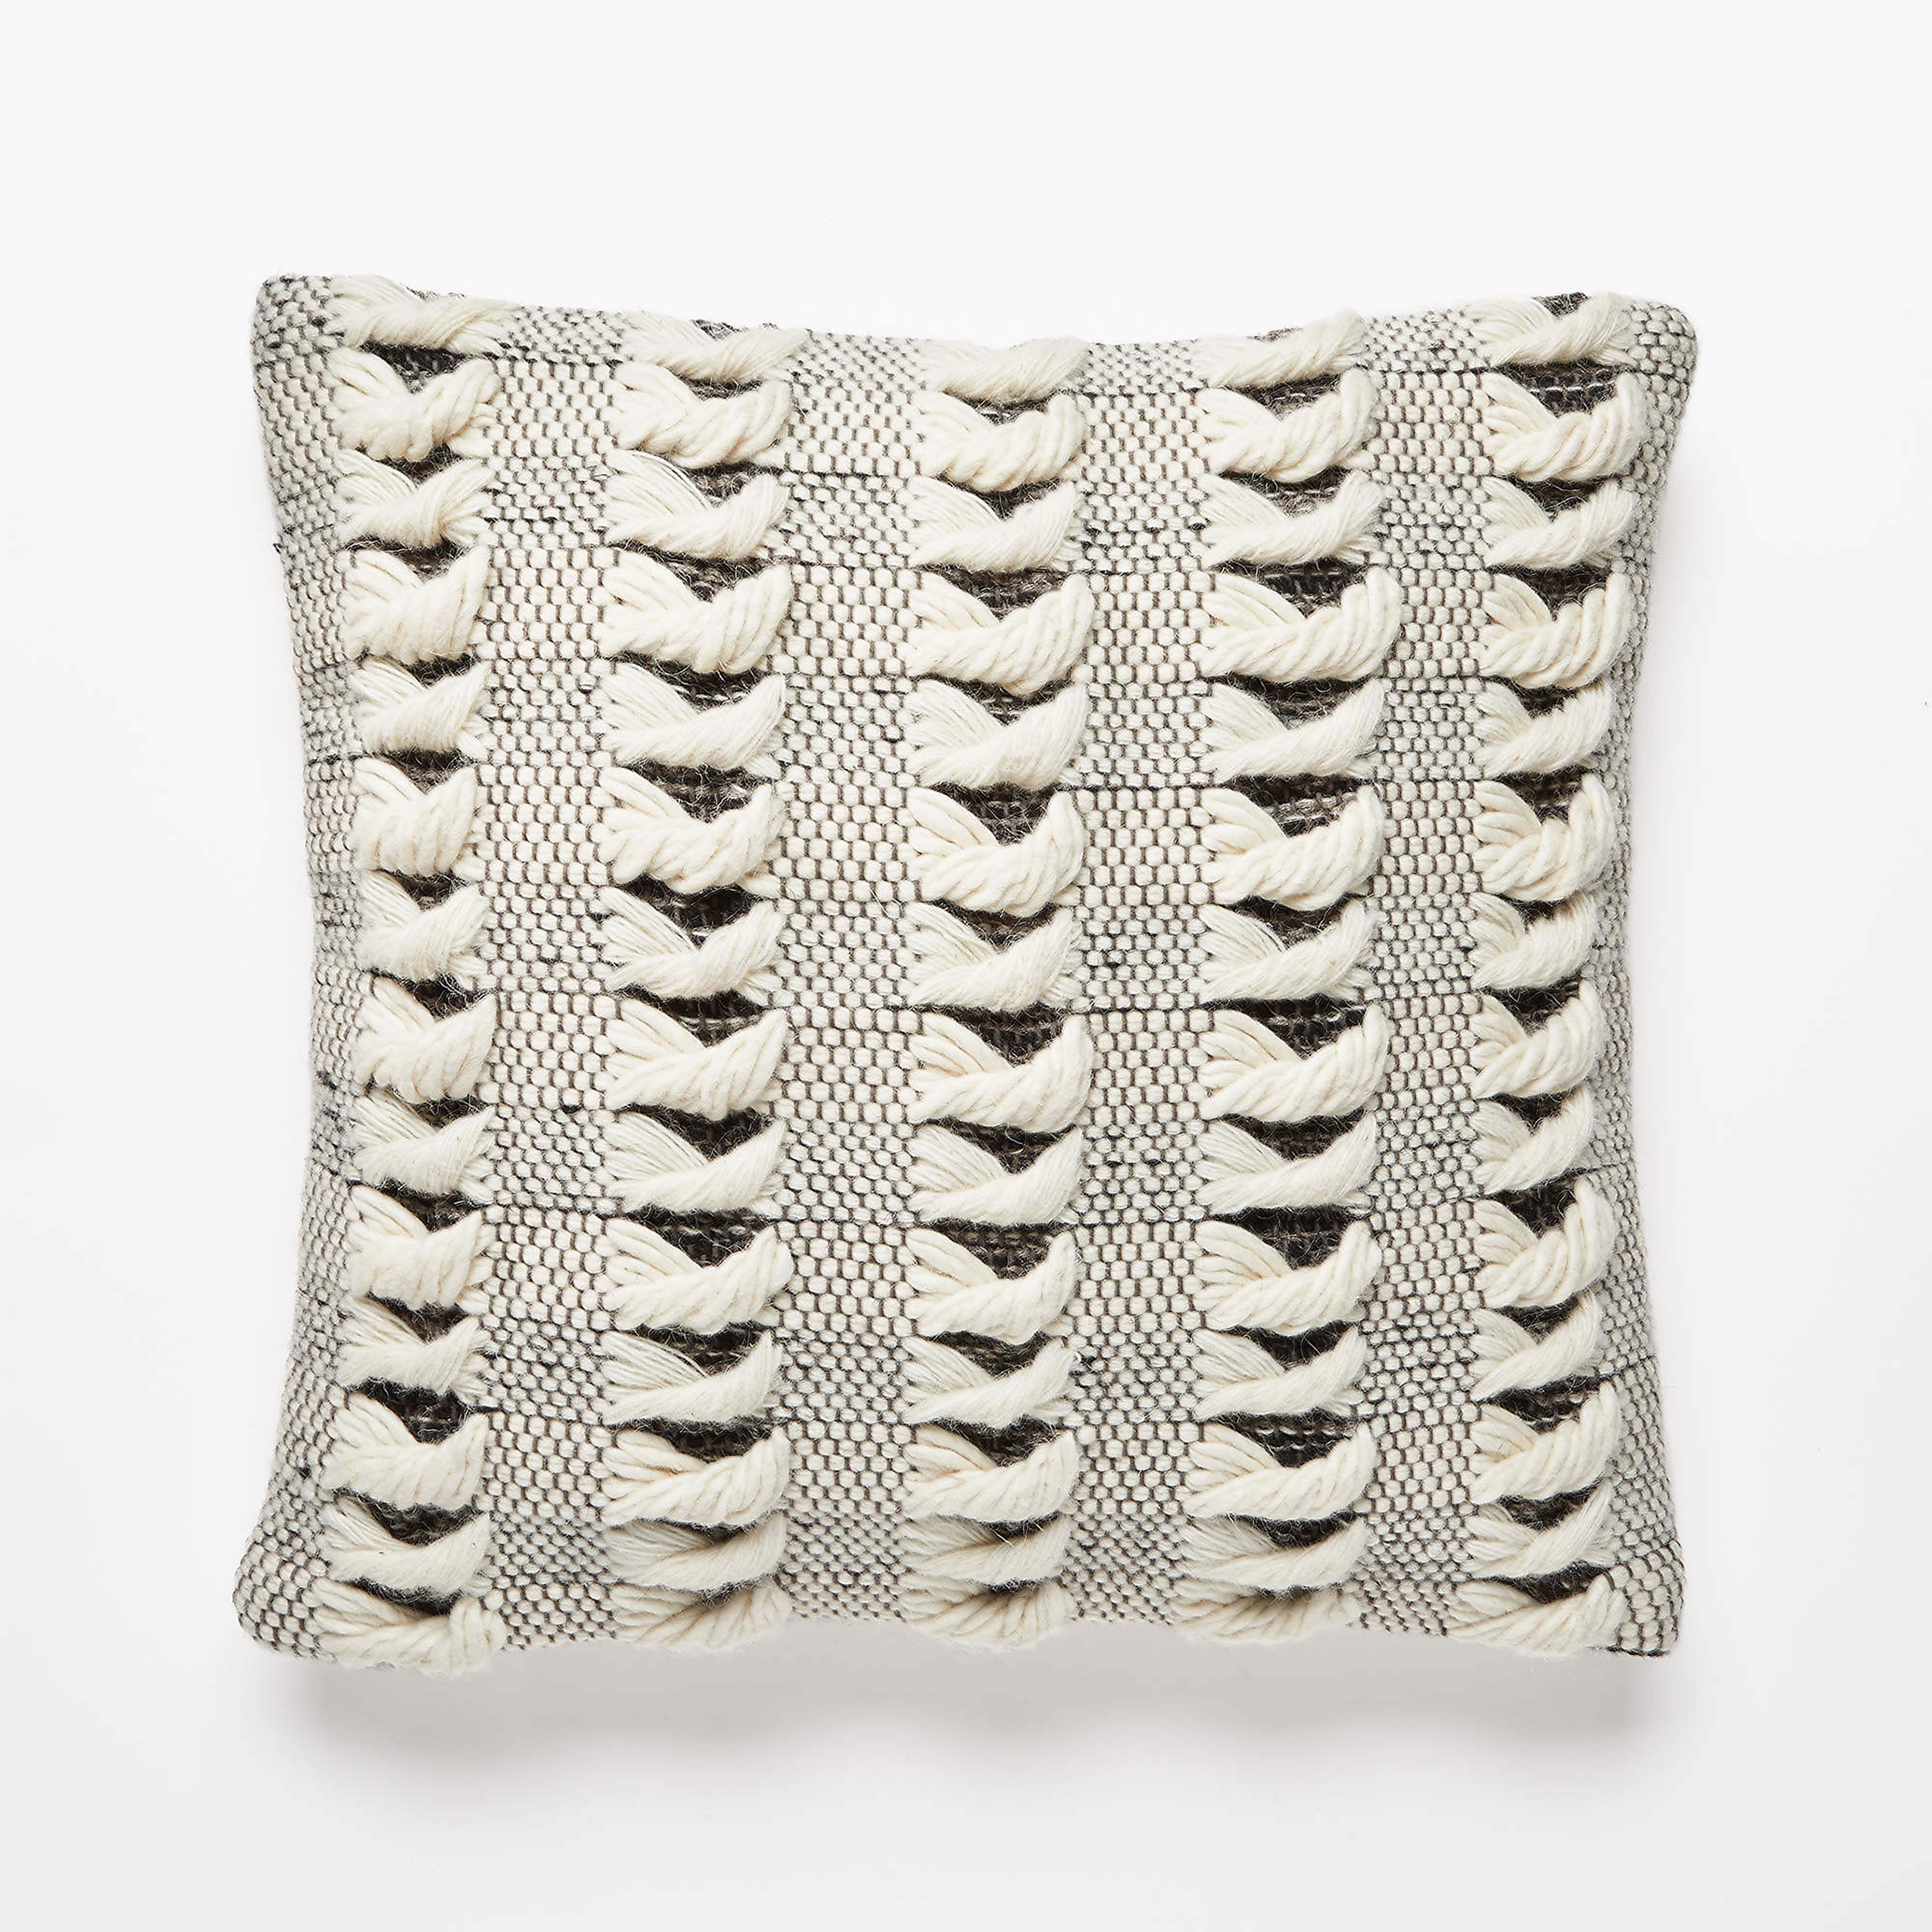 Simon Ivory White Wool Throw Pillow with Feather-Down Insert 20" - CB2